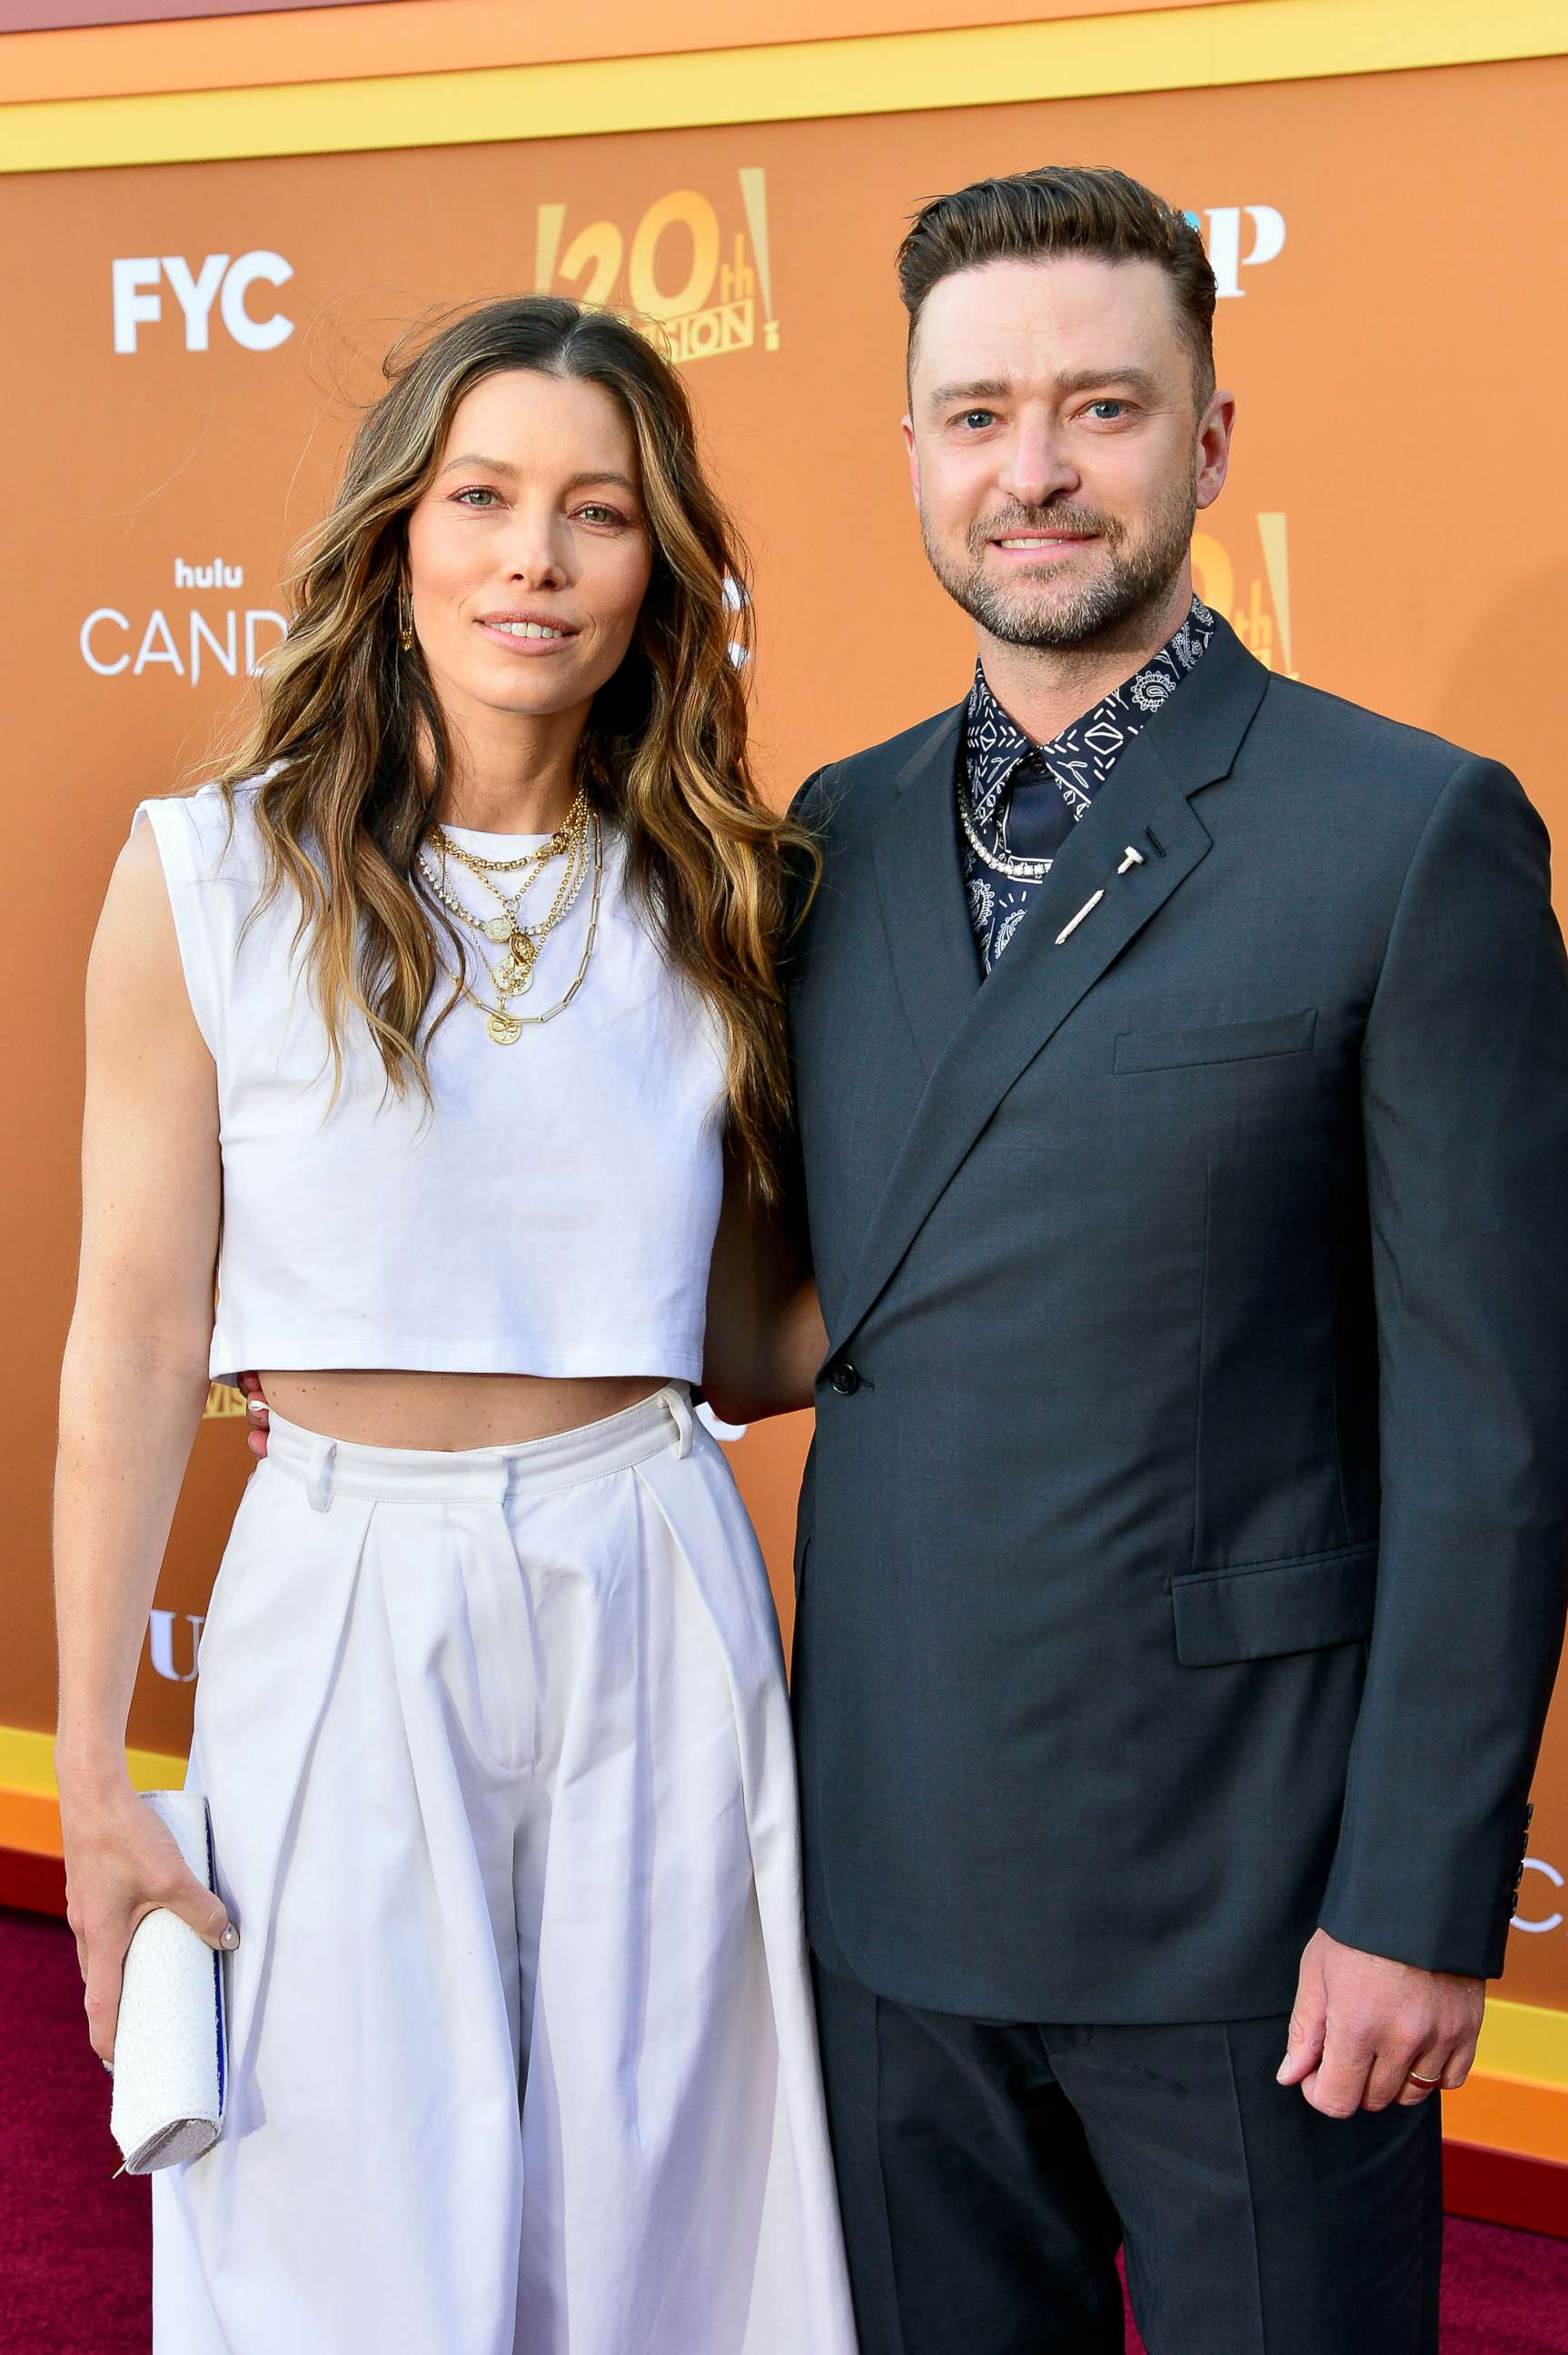 PHOTO: Jessica Biel and Justin Timberlake attend the Los Angeles Premiere FYC Event for Hulu's "Candy" at El Capitan Theatre, May 9, 2022, in Los Angeles.